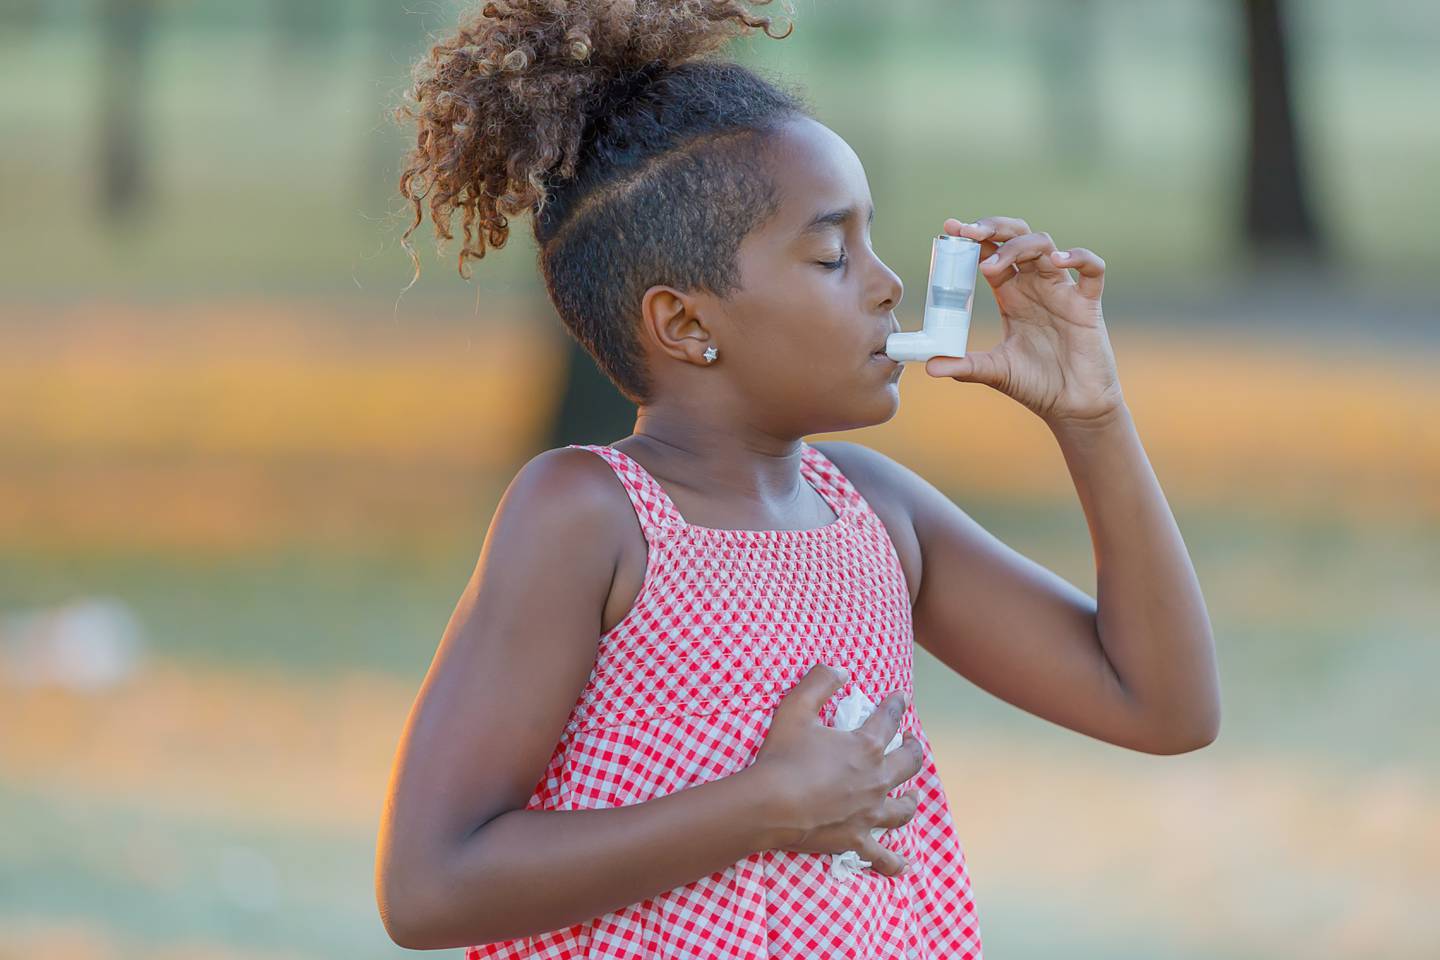 Cute Little Girl with Curly Hair is Walking in Public Park and Using an Asthma Inhaler Due to the Problems with Breathing.